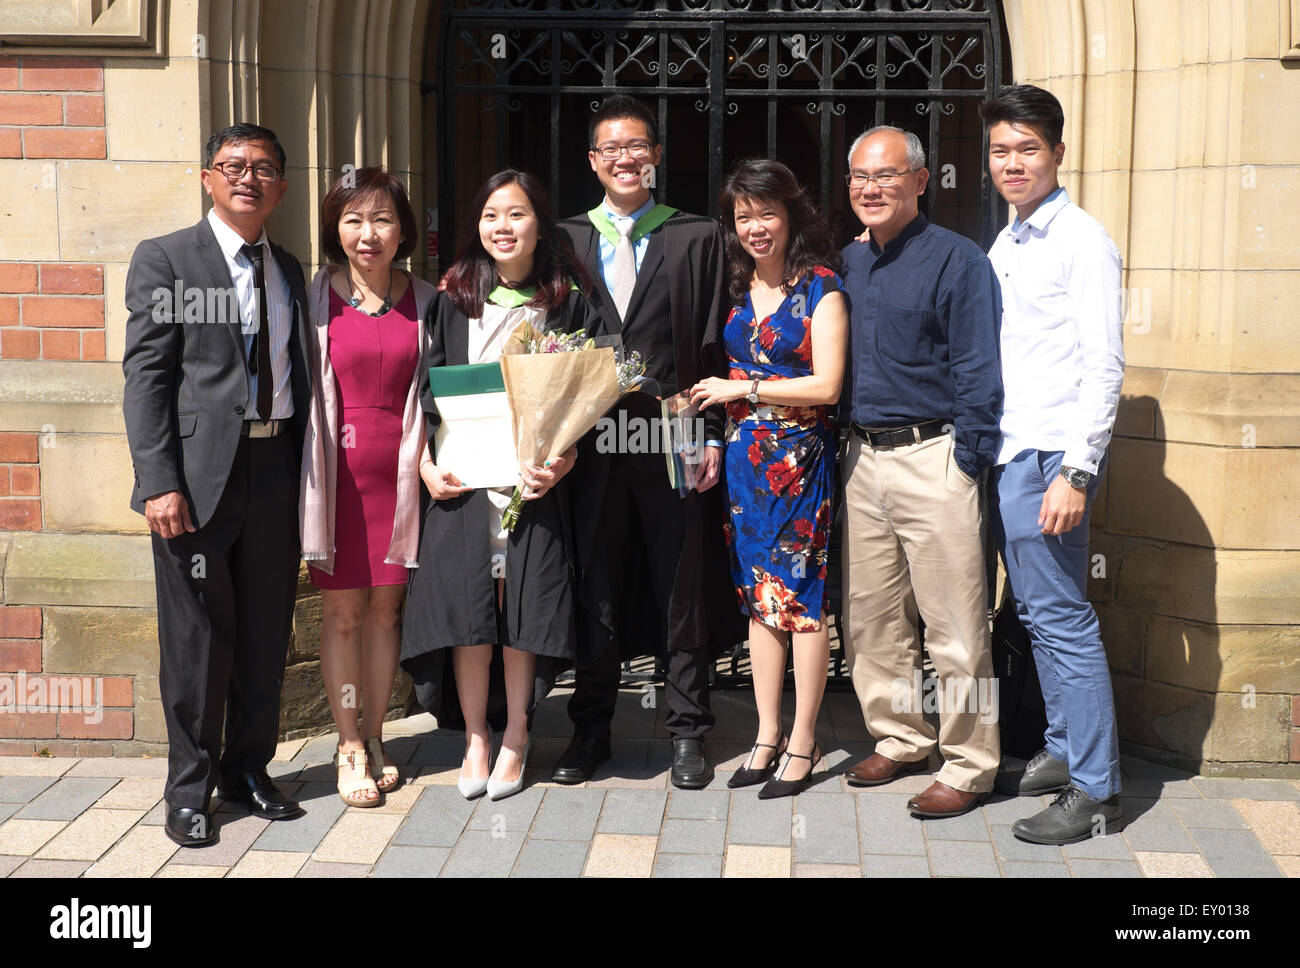 Graduation Day at the University of Leeds asian students celebrate with family members Stock Photo